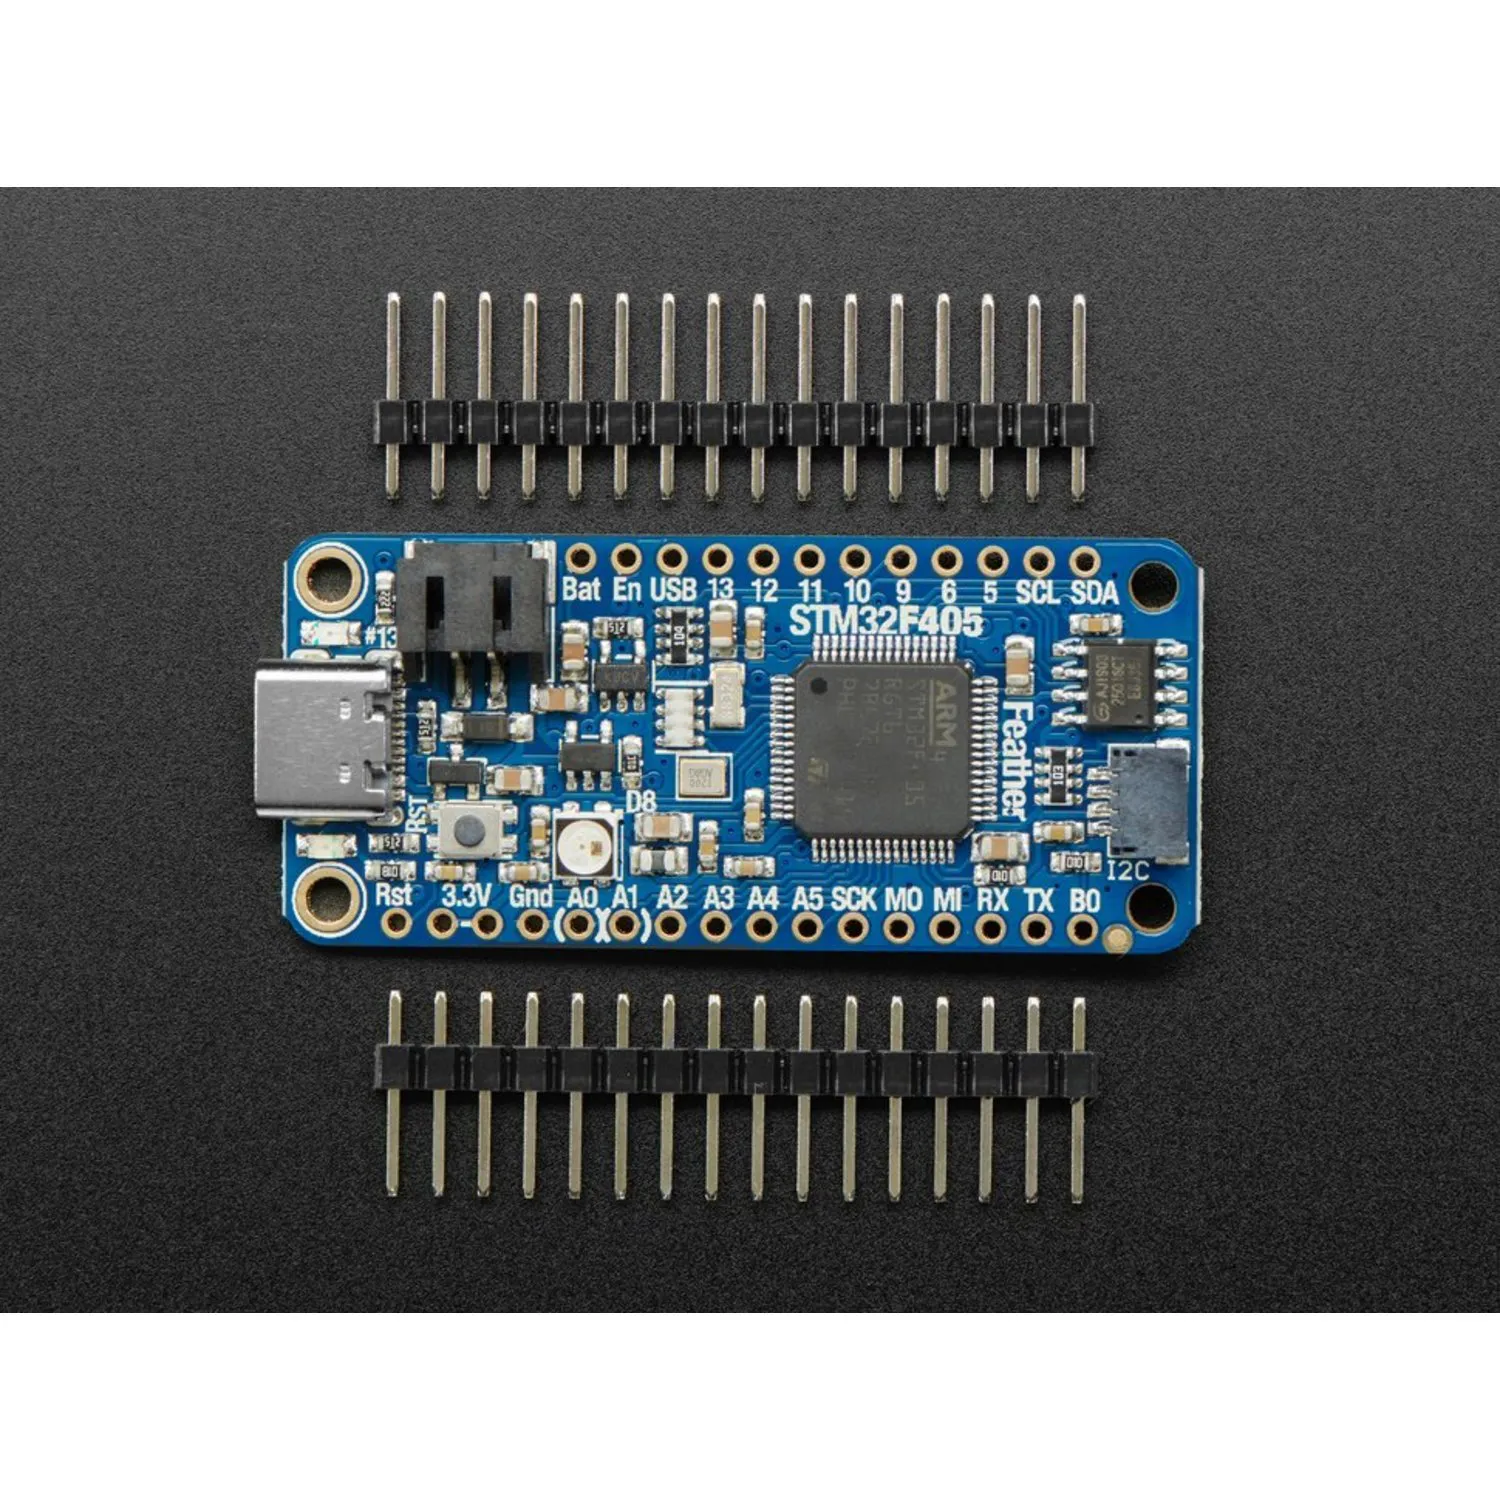 Photo of Adafruit Feather STM32F405 Express